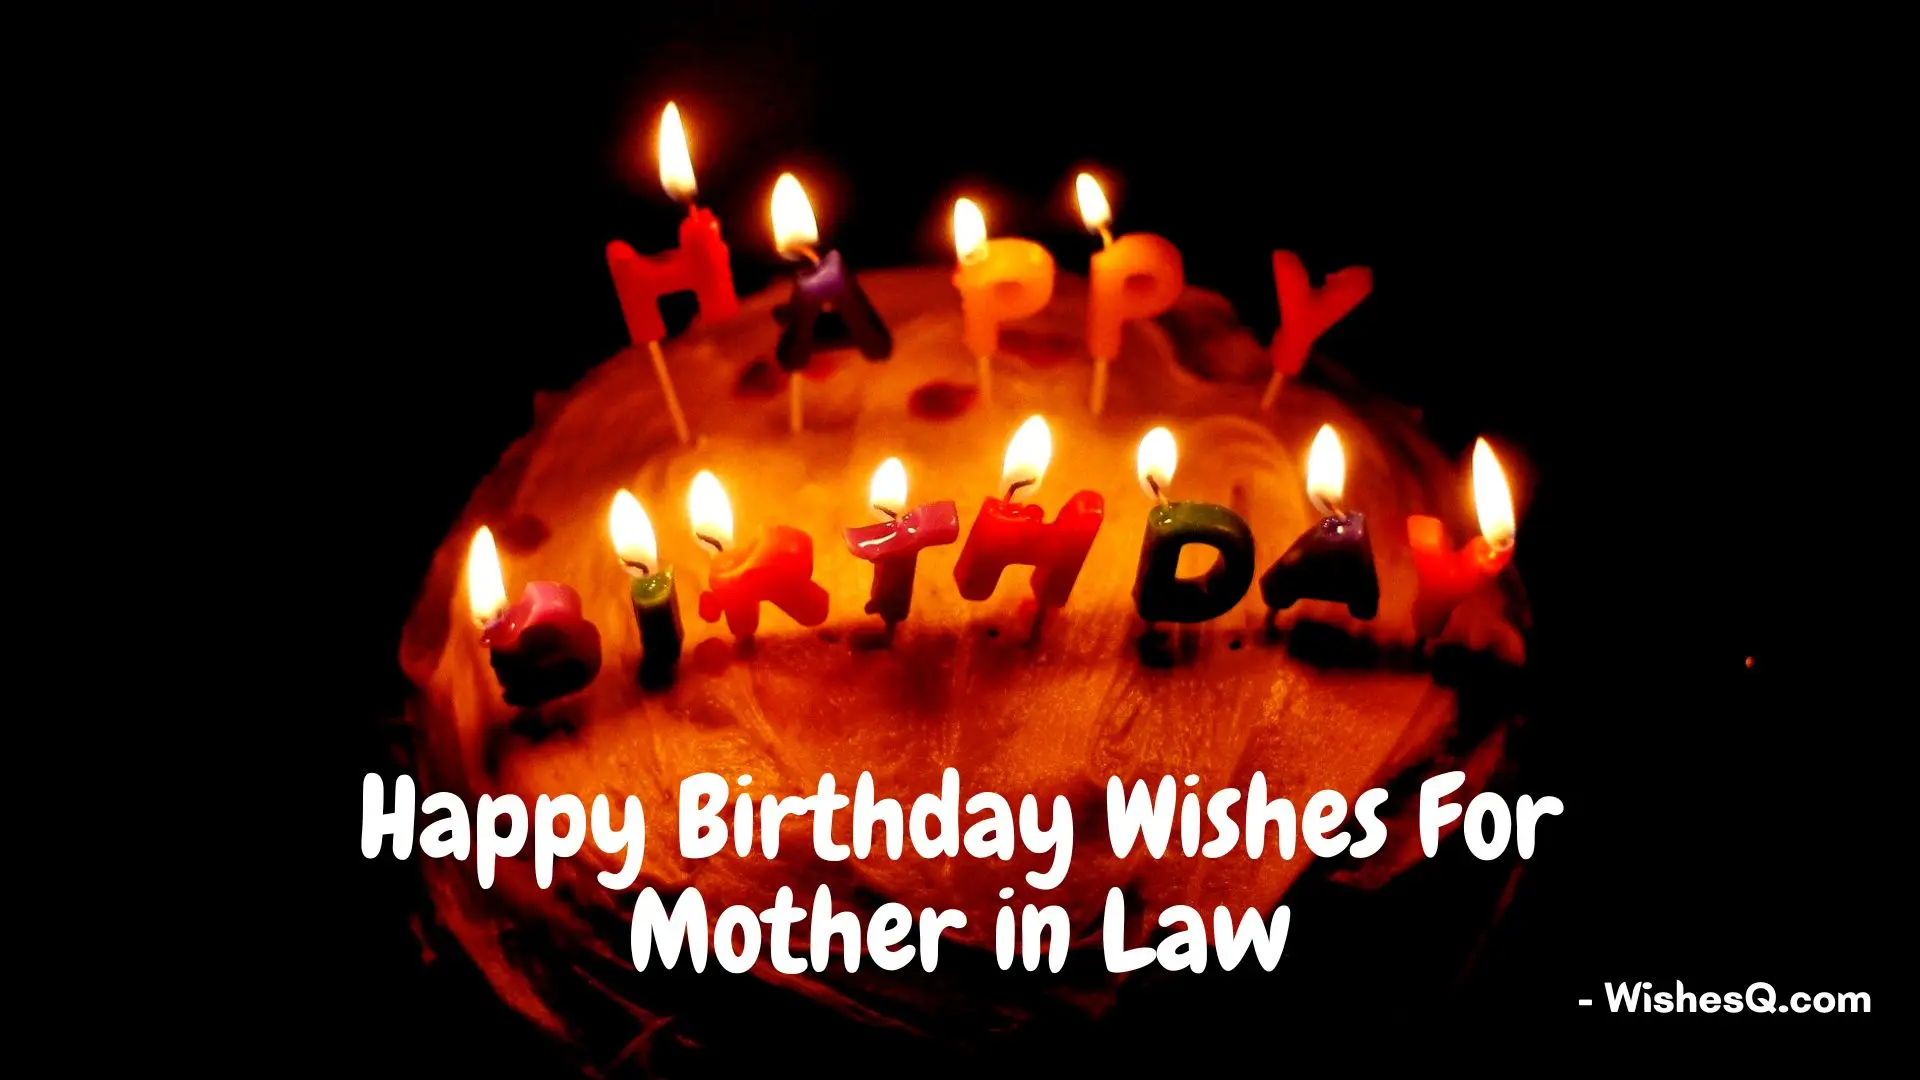 Best Happy Birthday Wishes For Mother In Law, Birthday Quotes For Mother In Law, Heart Touching Birthday Wishes For Mother-In-Law, Birthday Wishes For Mother in Law, Mother in Law Birthday Quotes, Birthday Wishes For Future Mother-In-Law, and Birthday Message For Mother In Law.